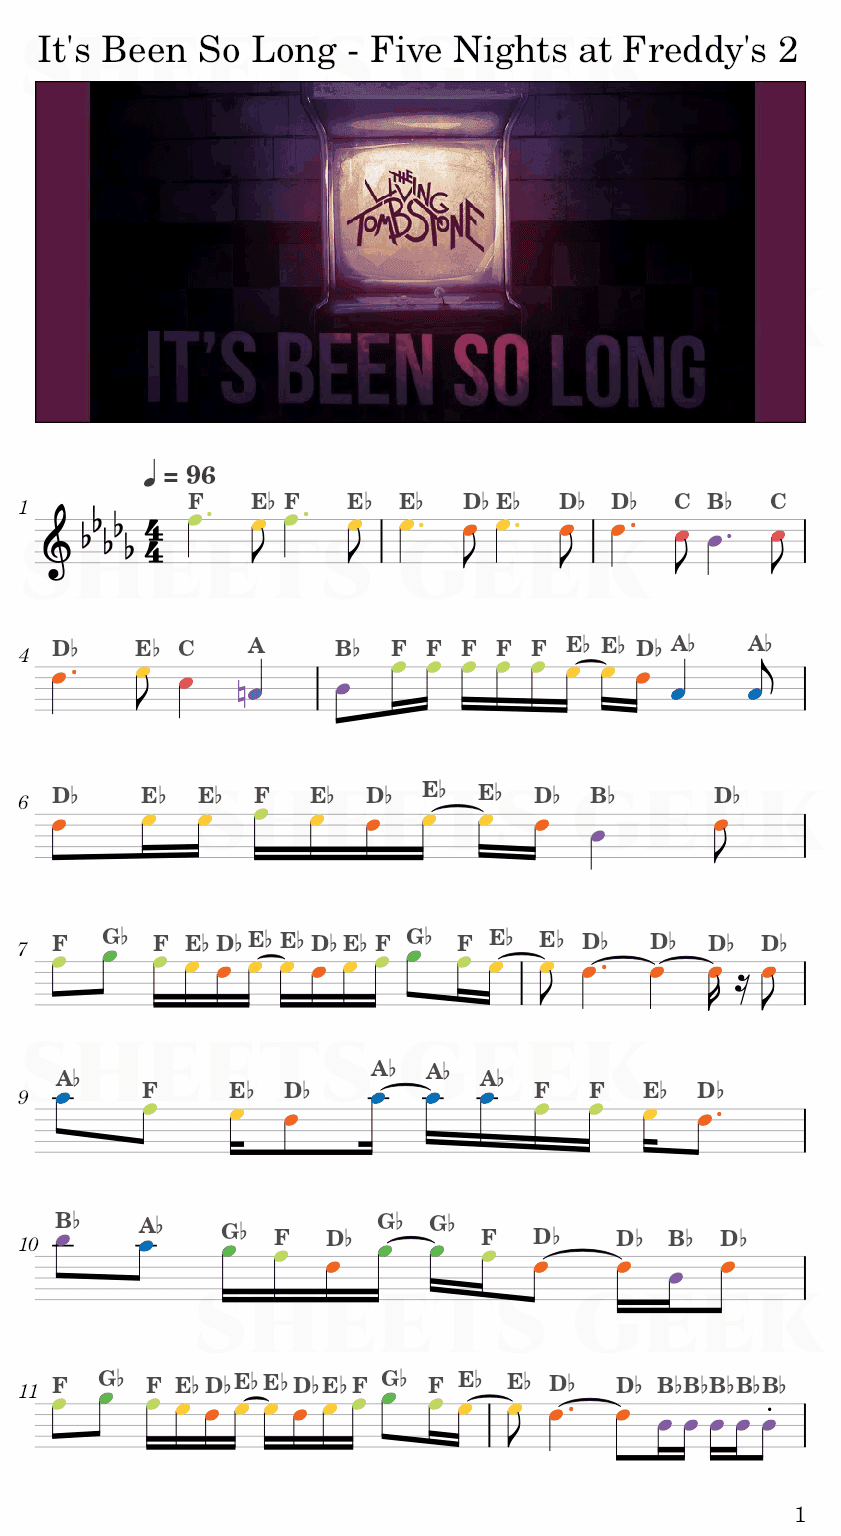 It's Been So Long - Five Nights at Freddy's 2 Song Easy Sheet Music Free for piano, keyboard, flute, violin, sax, cello page 1